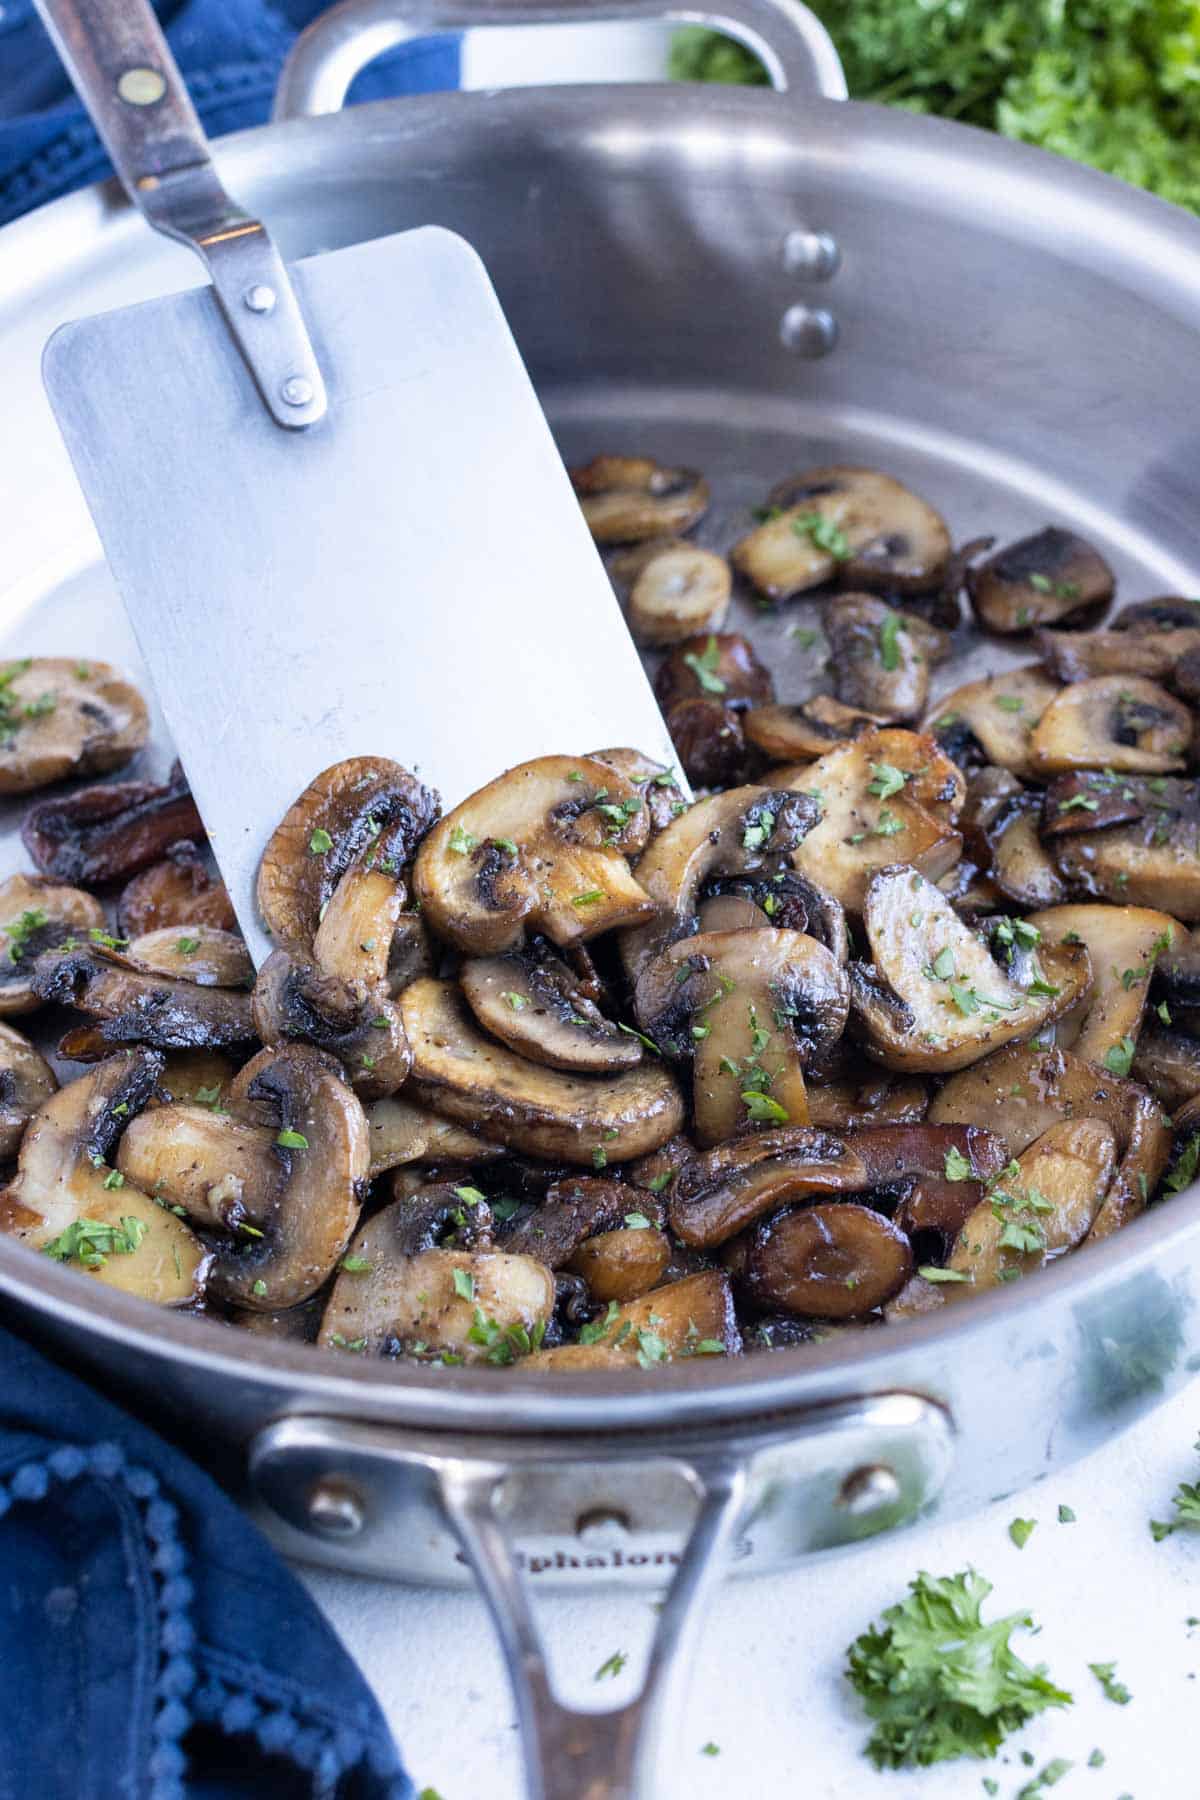 A skillet full of mushrooms cooked with butter and garlic.